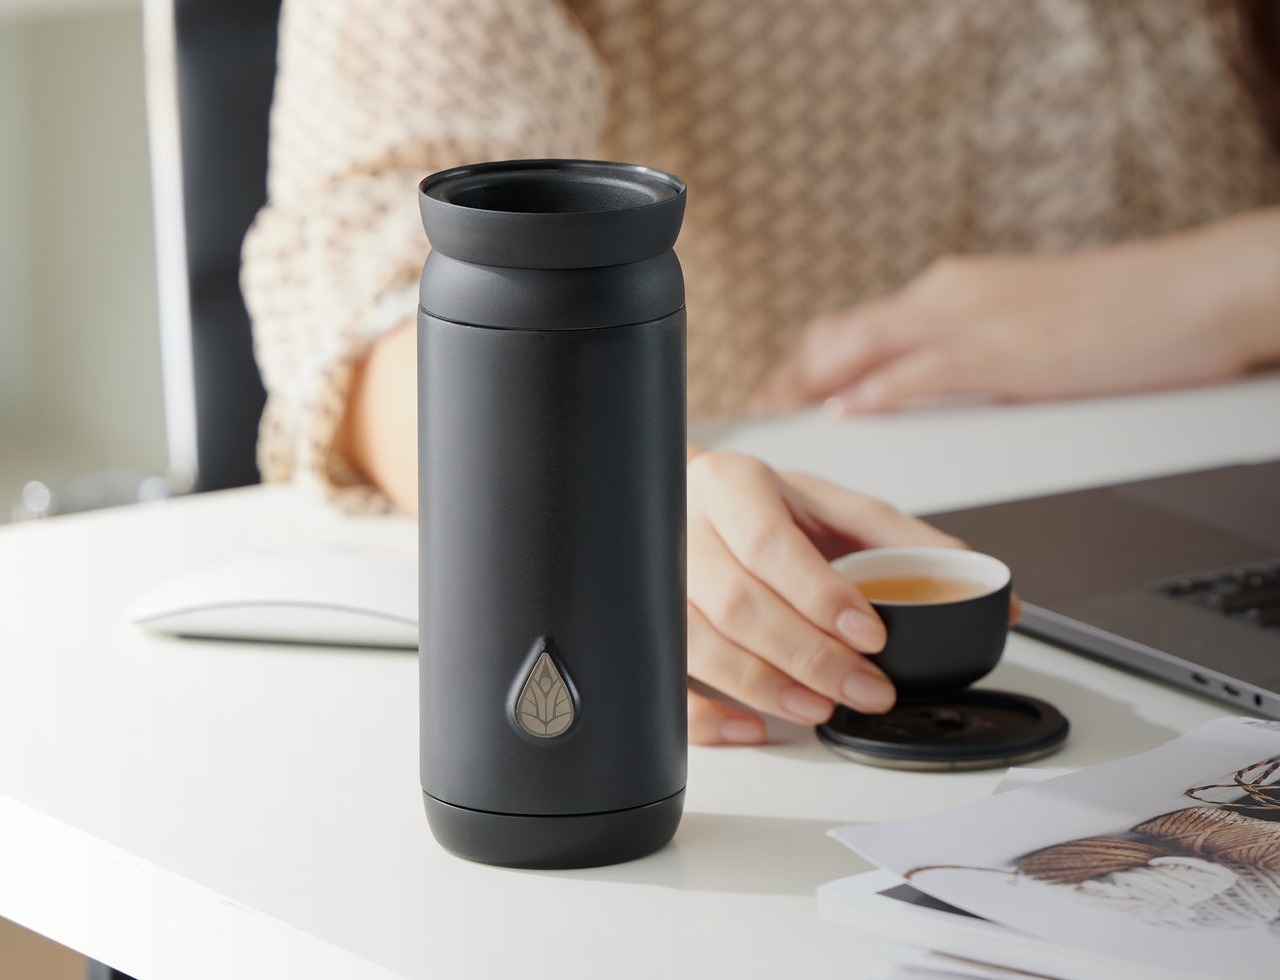 https://www.yankodesign.com/images/design_news/2022/03/tea_tumbler_with_a_french-press-style_brewing_system_01.jpg